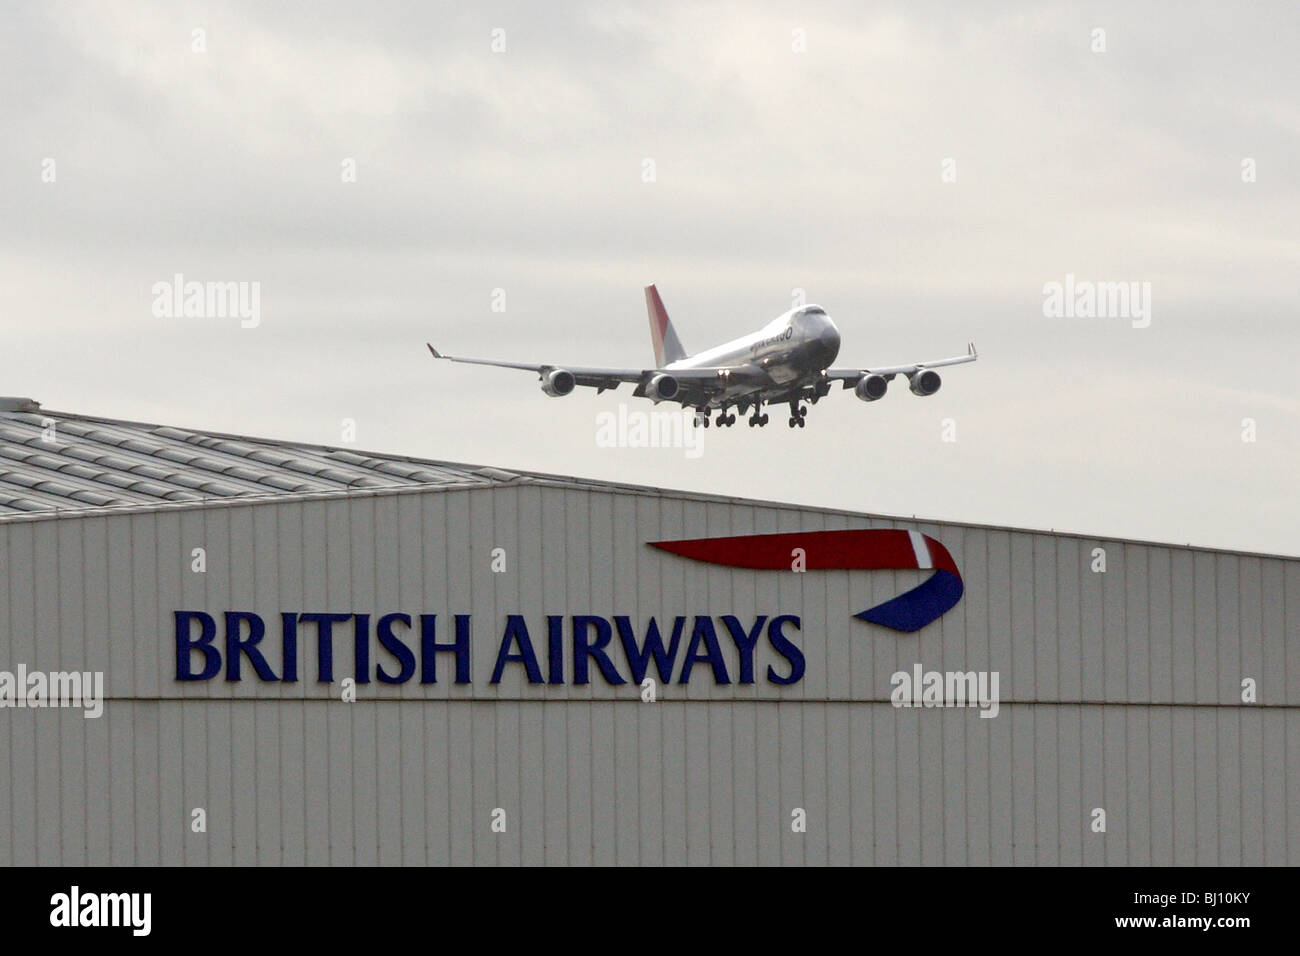 A passenger plane flying over a hangar of the British Airways, London, Great Britain Stock Photo